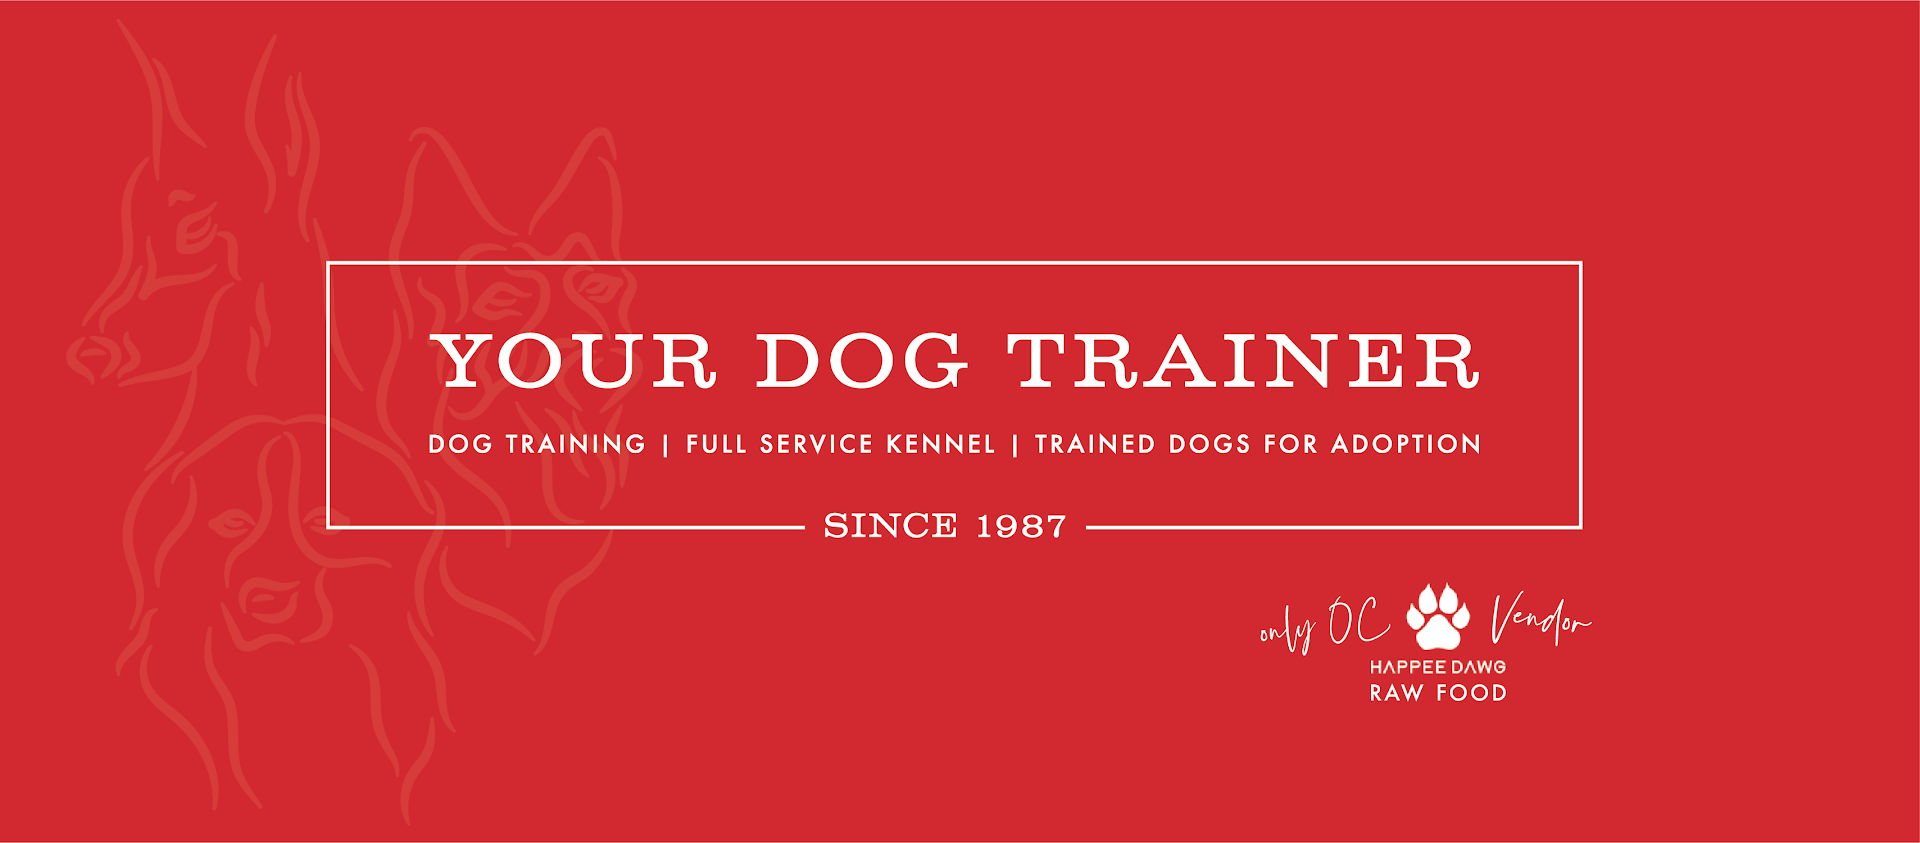 Your Dog Trainer